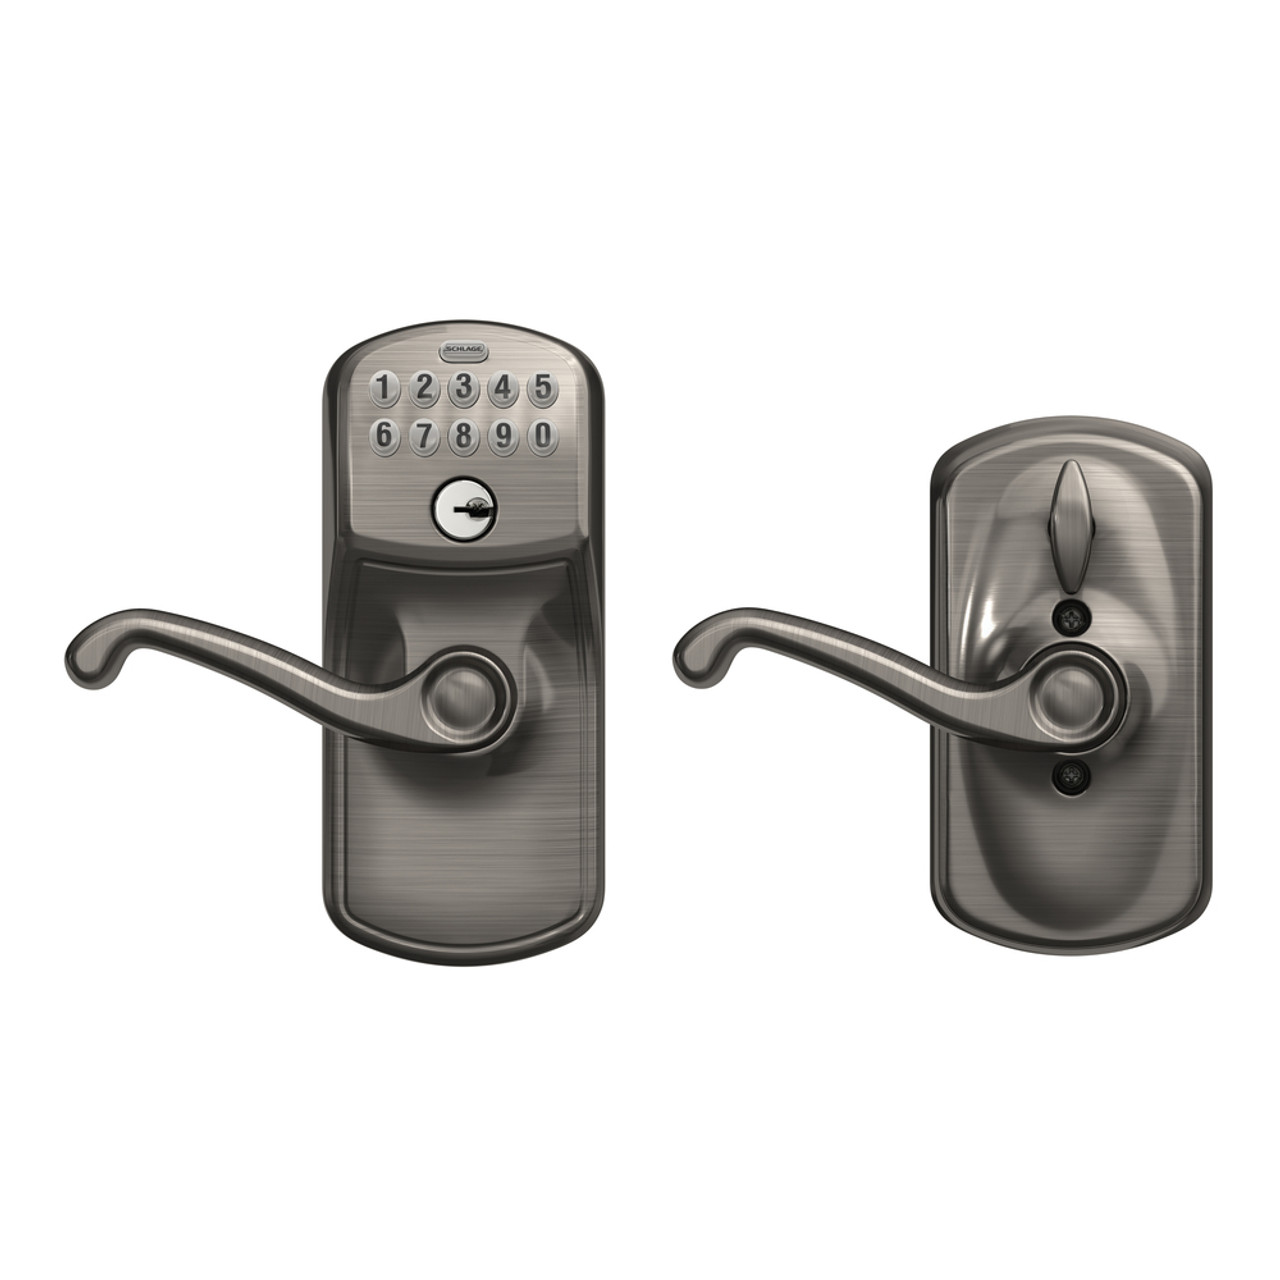 Schlage FE595 - Keypad Entry with Flex-Lock Plymouth Housing Flair Lever